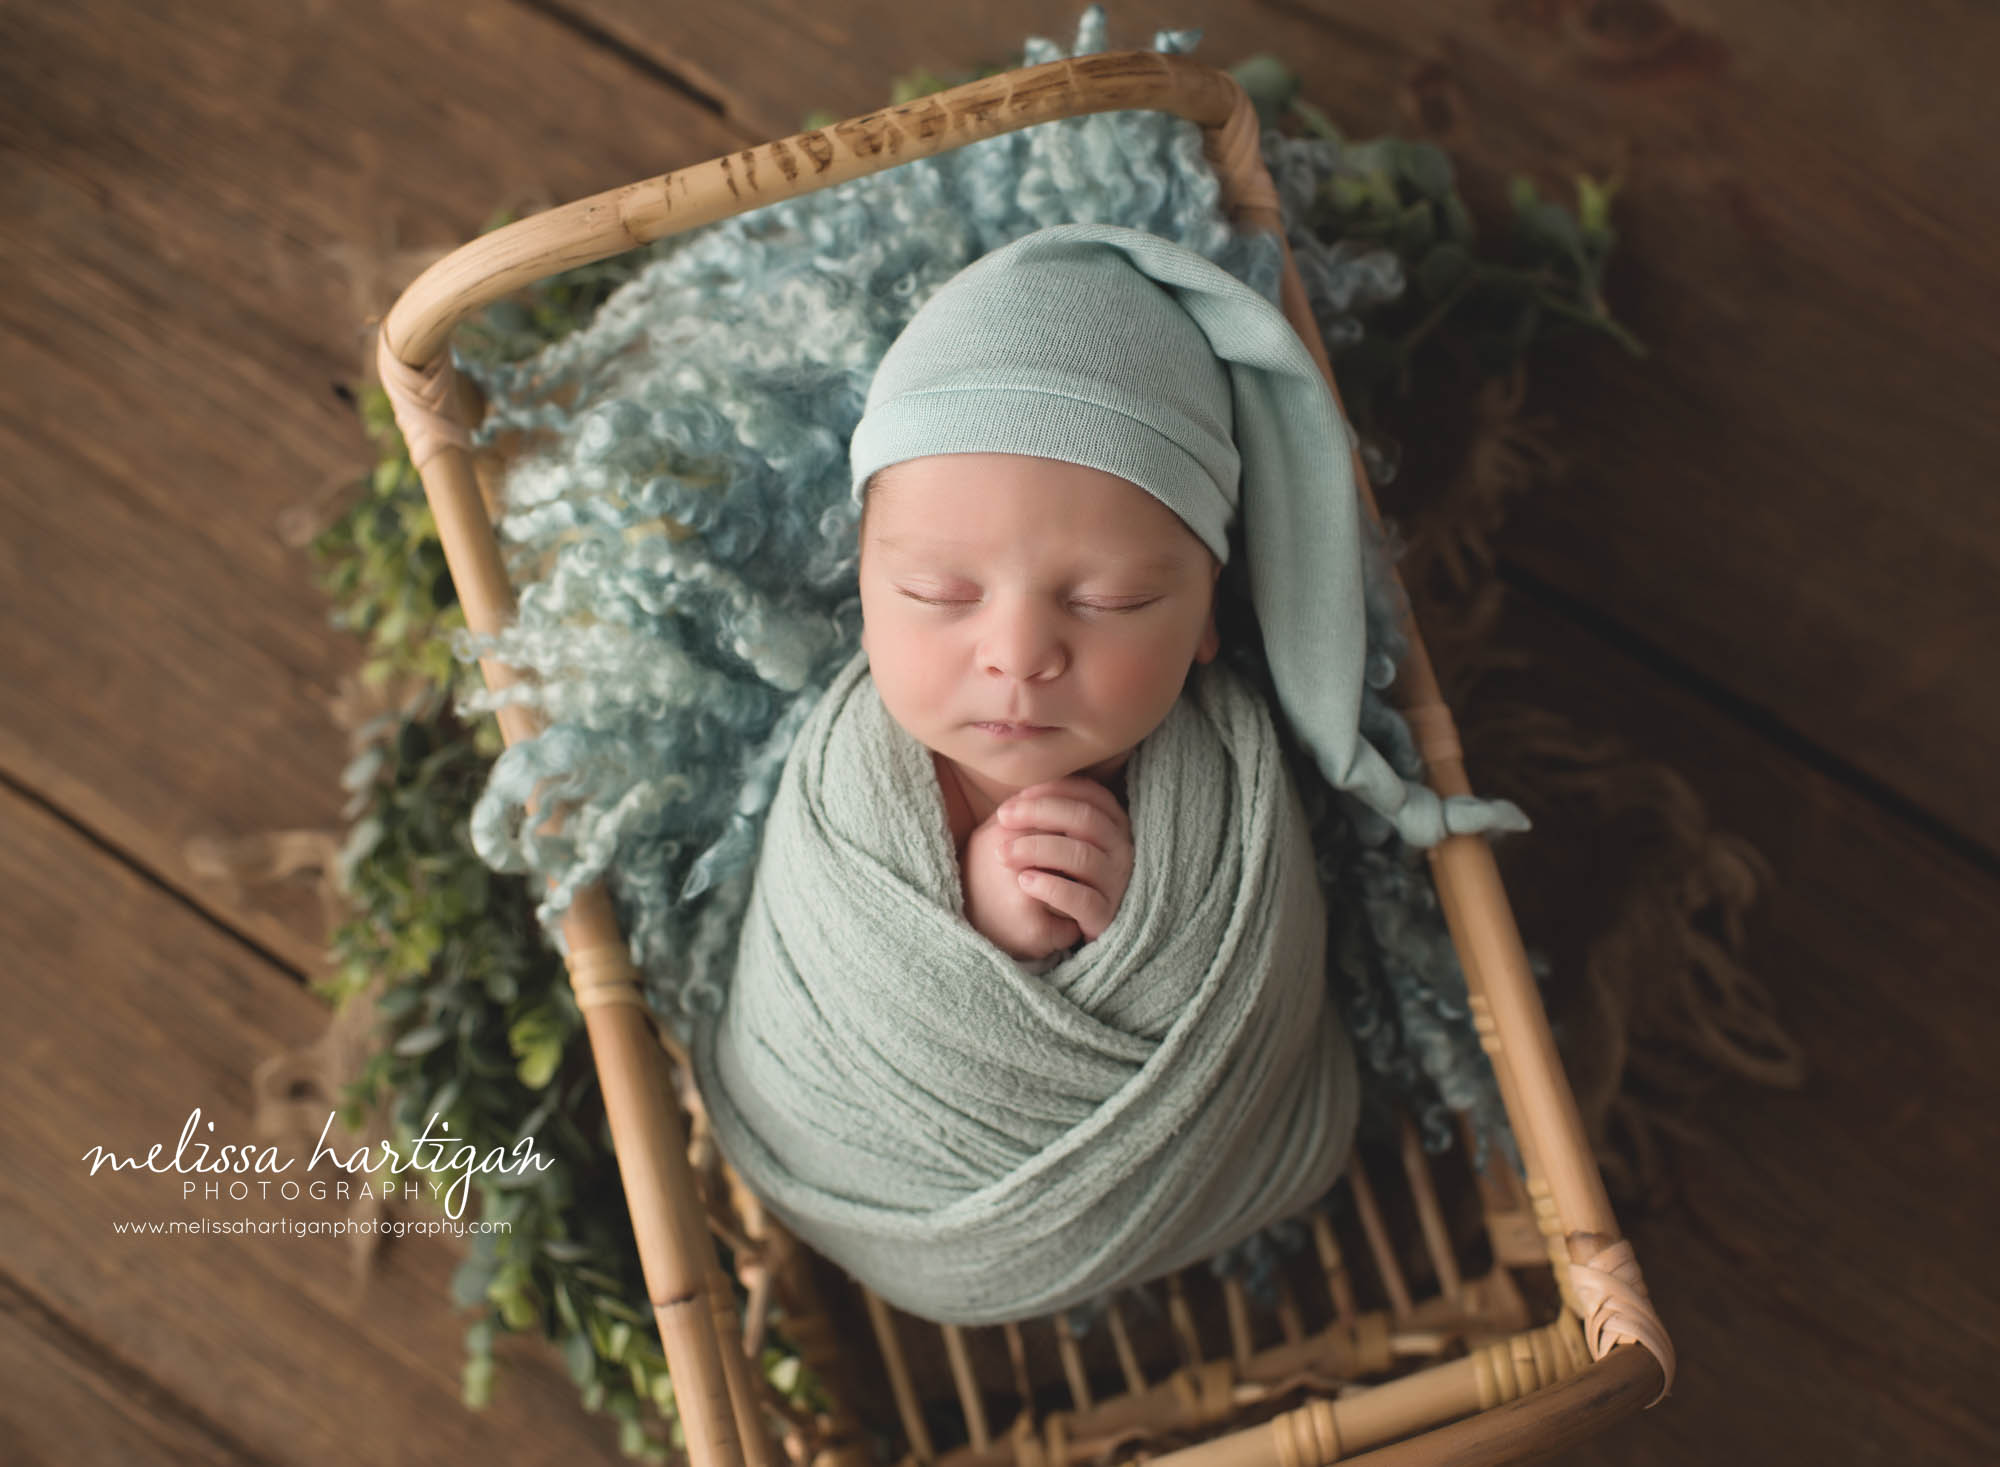 newborn baby boy posed in basket with mint green sleepy cap and wrap